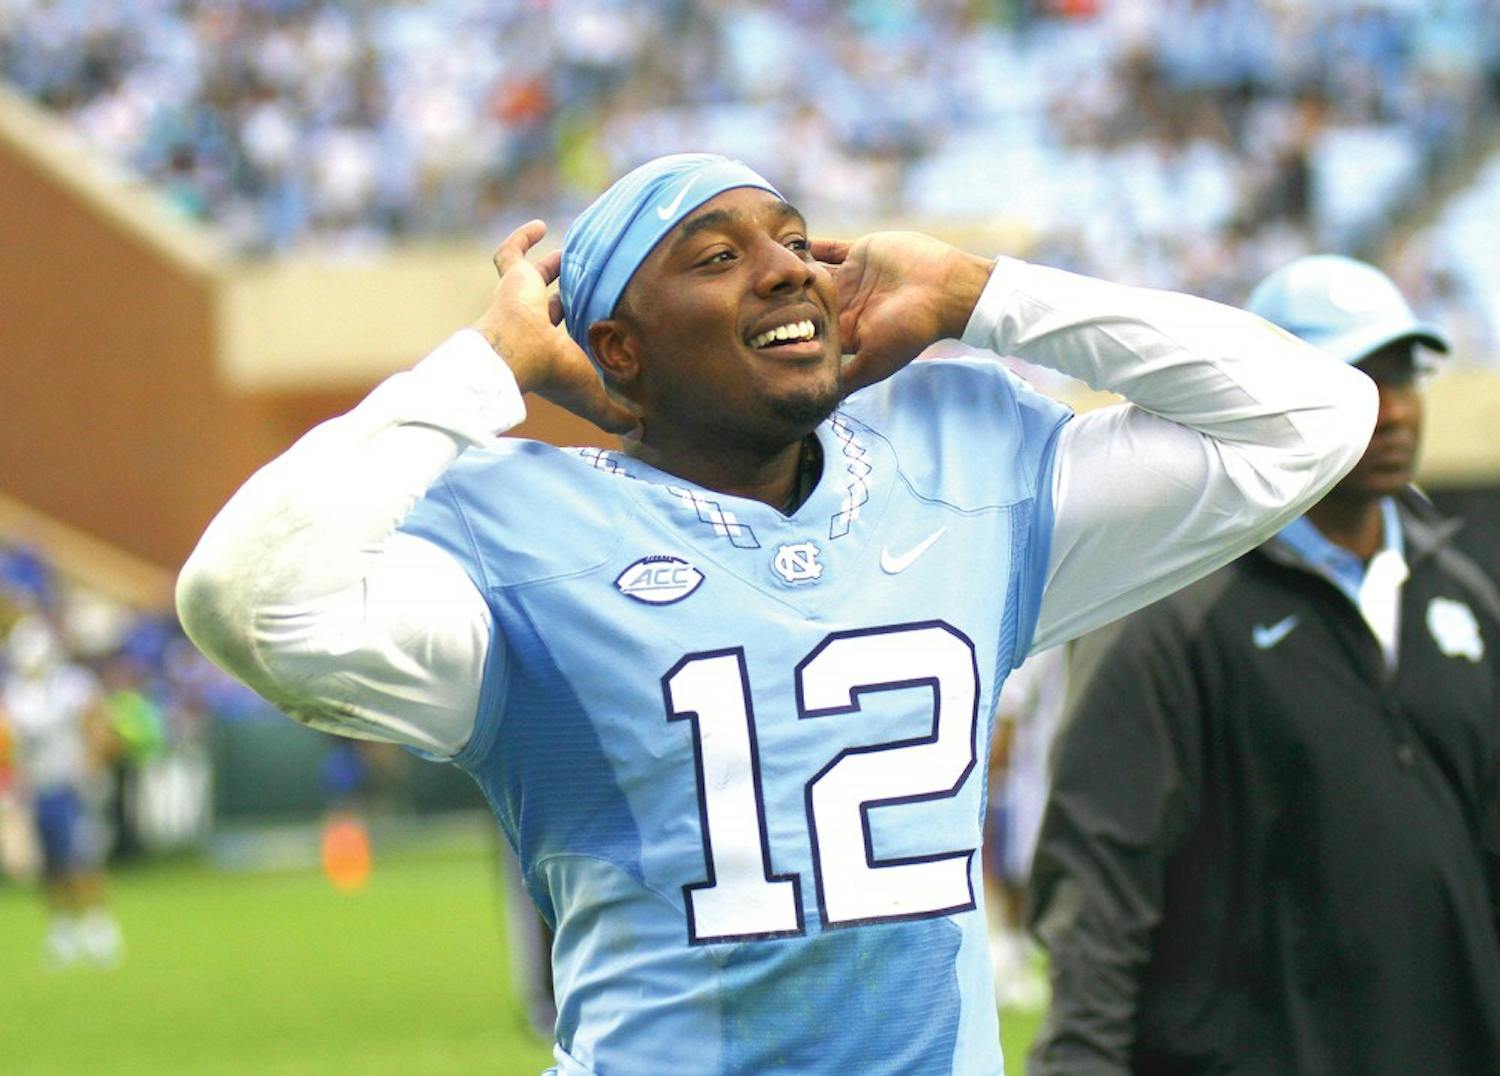 Redshirt senior quarterback Marquise Williams now holds North Carolina's record for career touchdowns, with 83, after his five touchdowns in a blowout of Duke on Saturday.